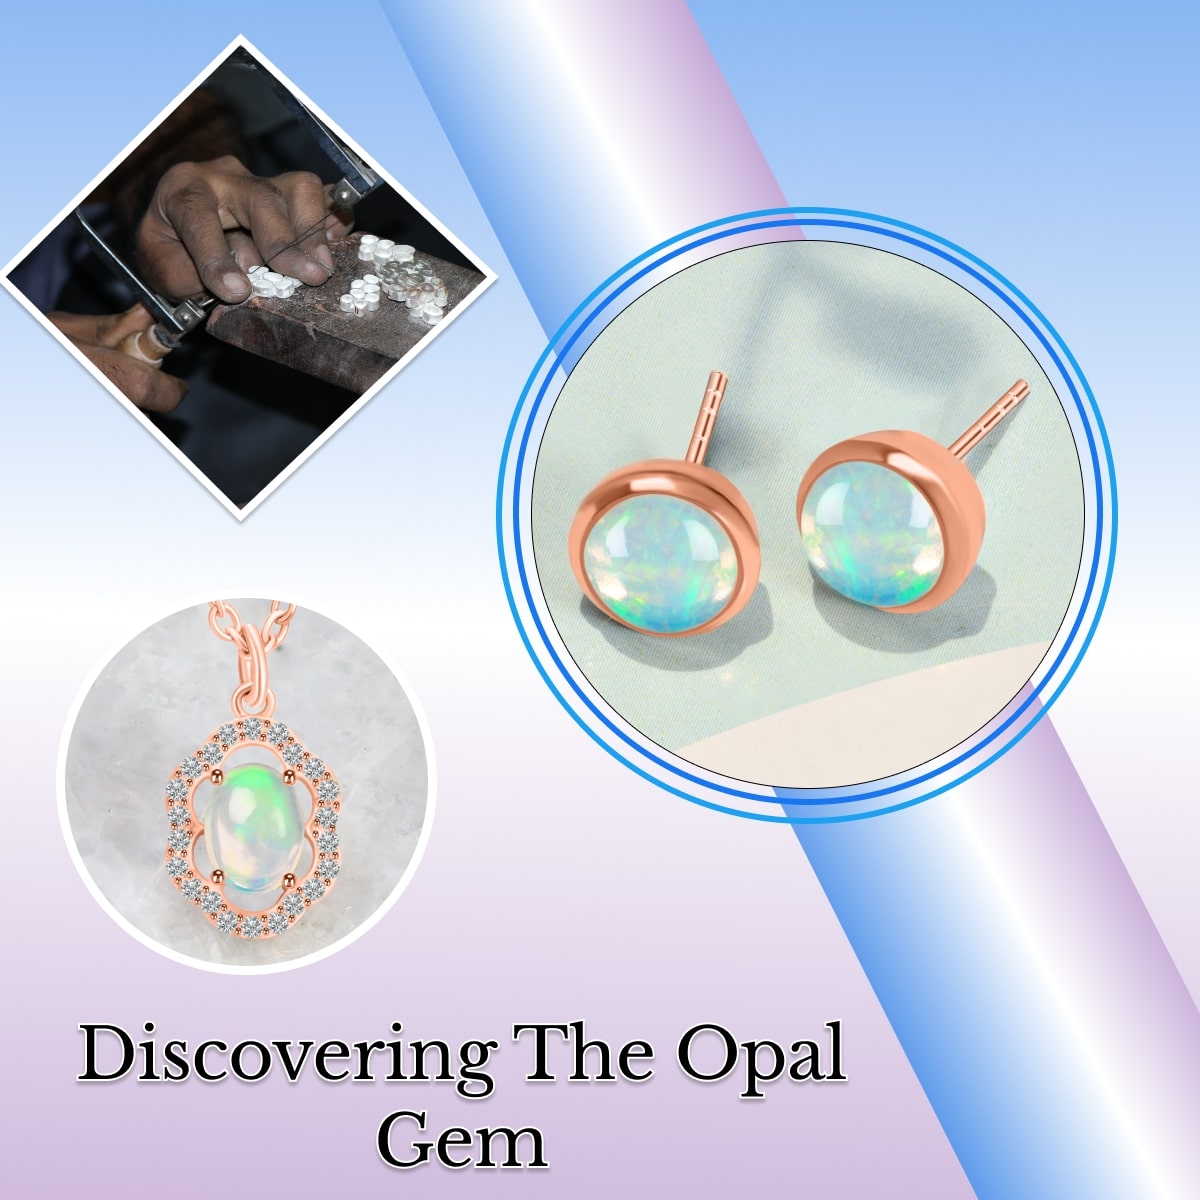 What Is an Opal